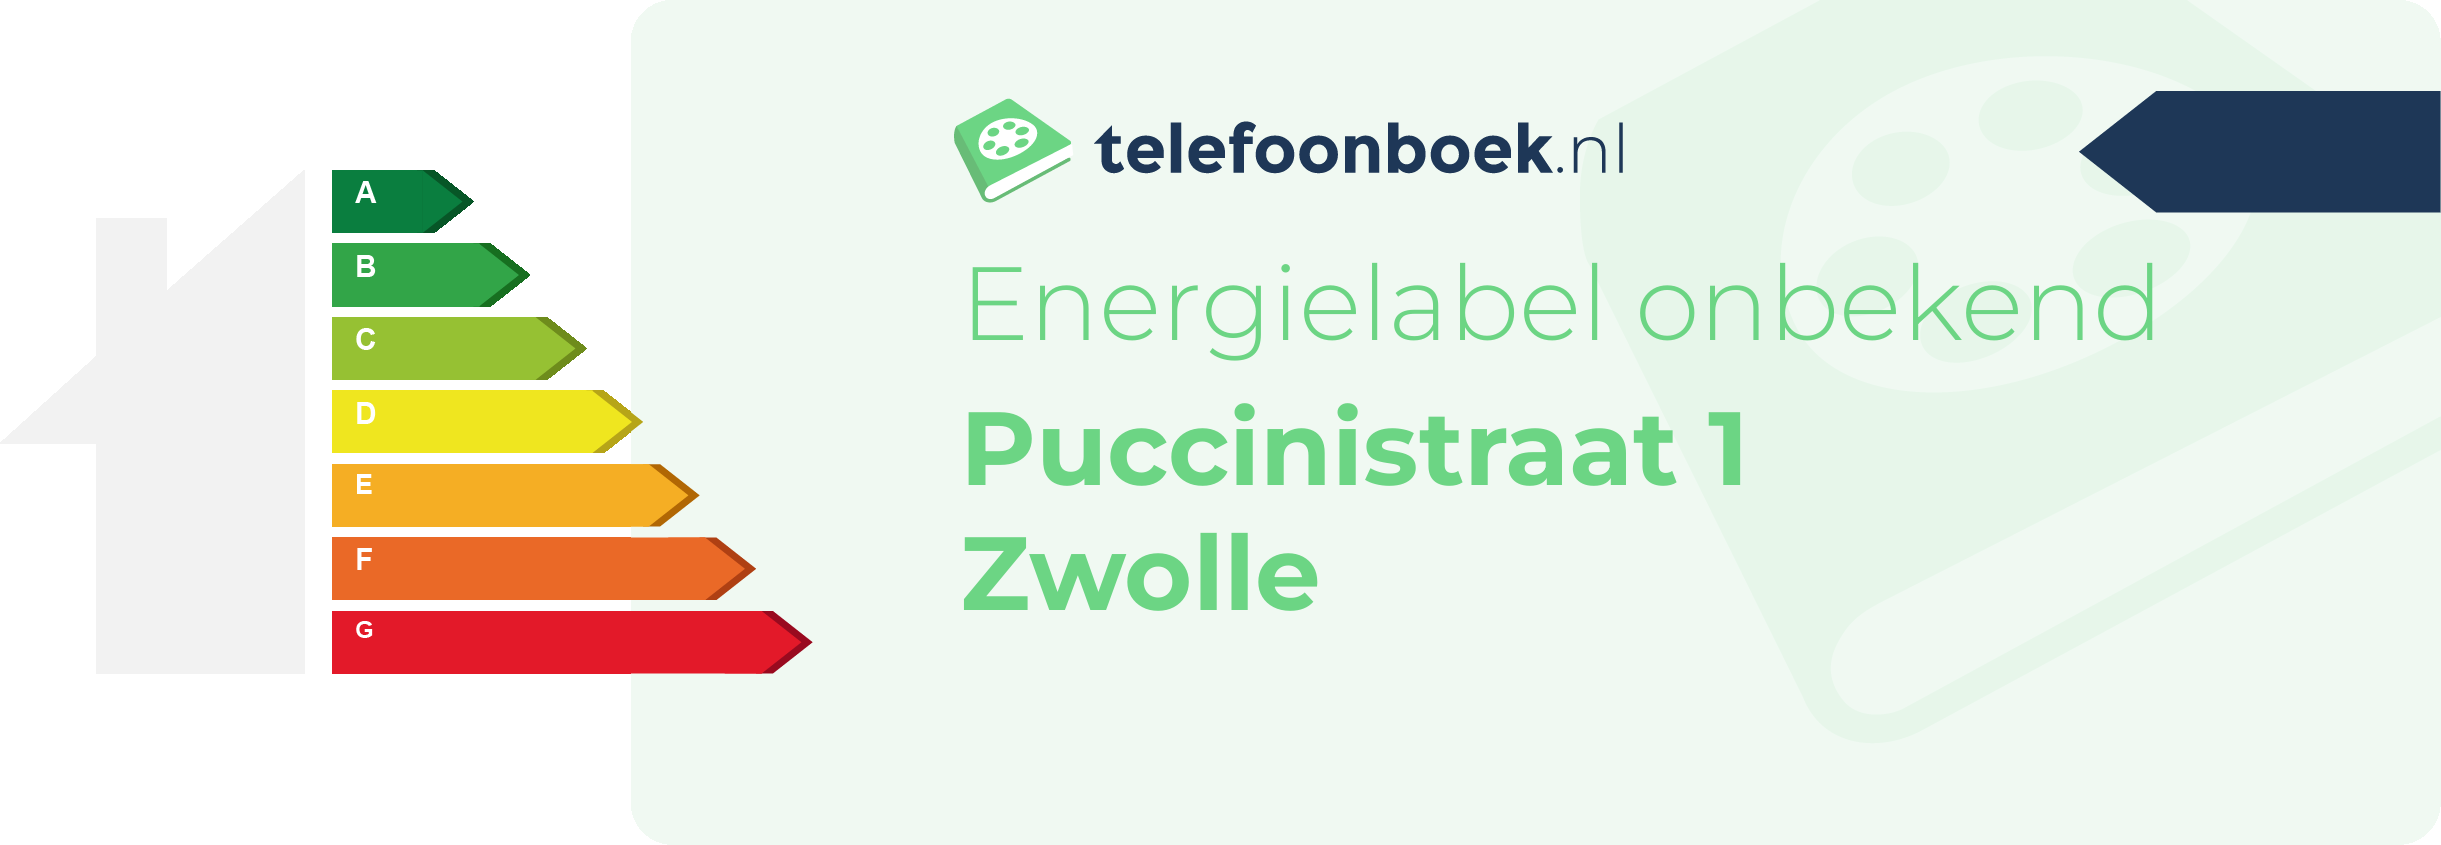 Energielabel Puccinistraat 1 Zwolle